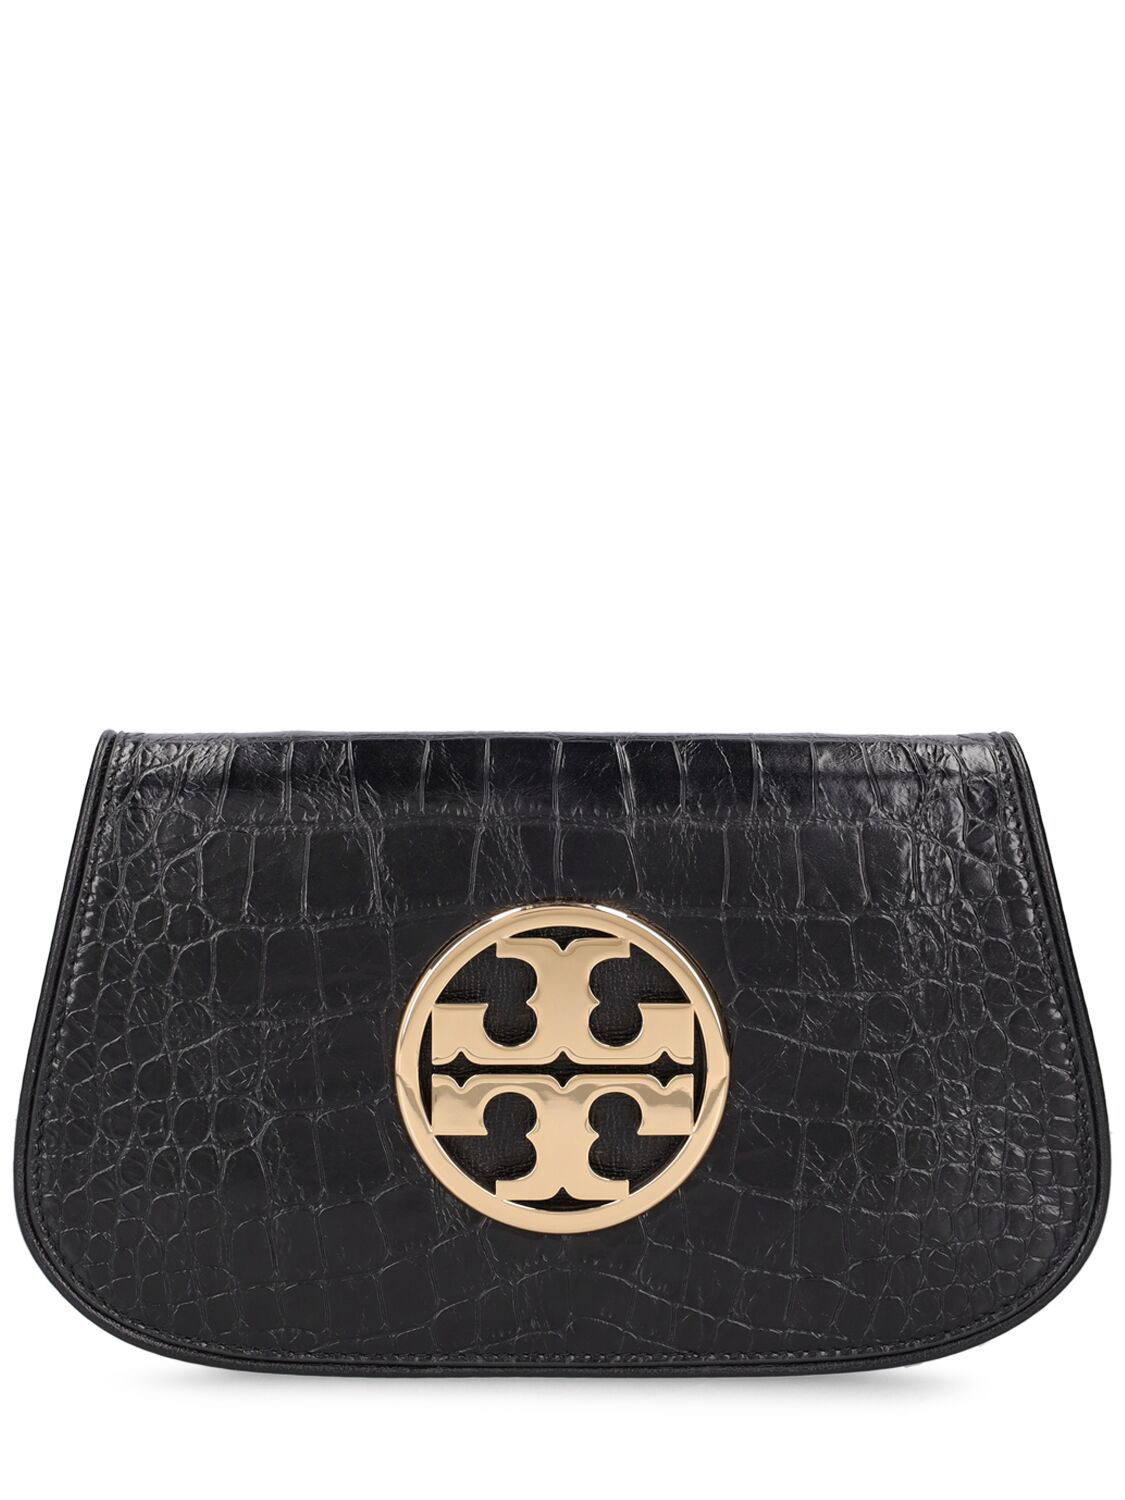 Image of Reva Embossed Leather Clutch